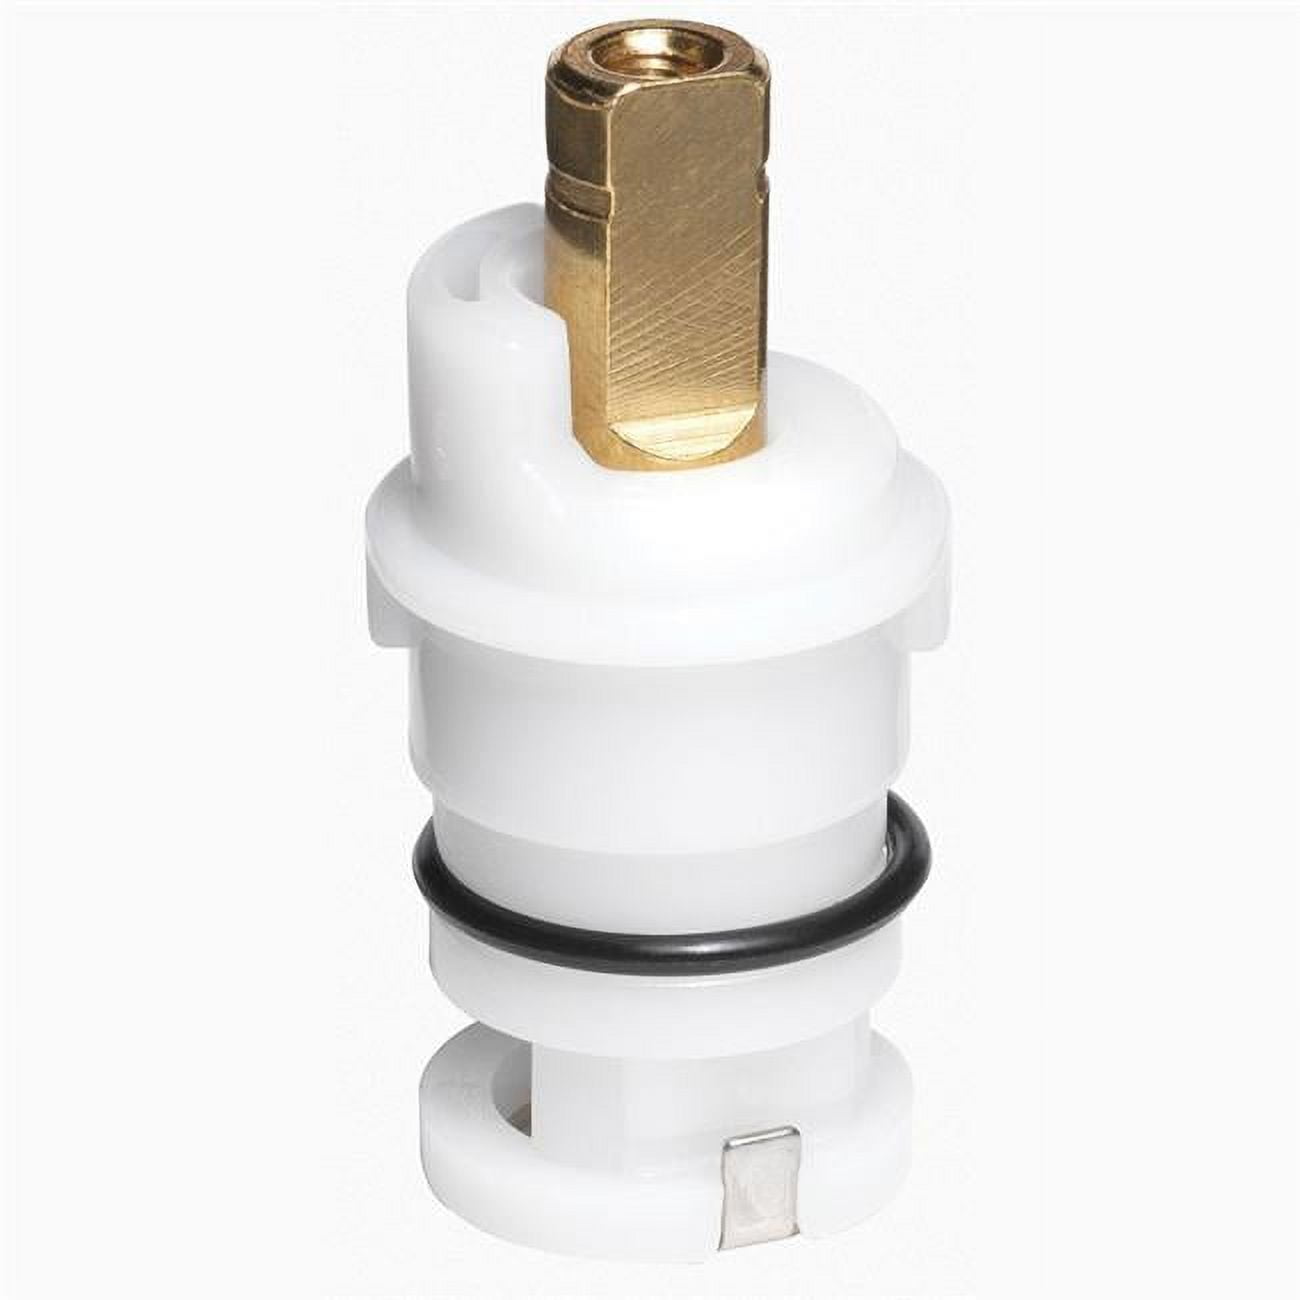 4914495 Hot & Cold Faucet Cartridge For Coastal & Tucana Faucets - Pack Of 5